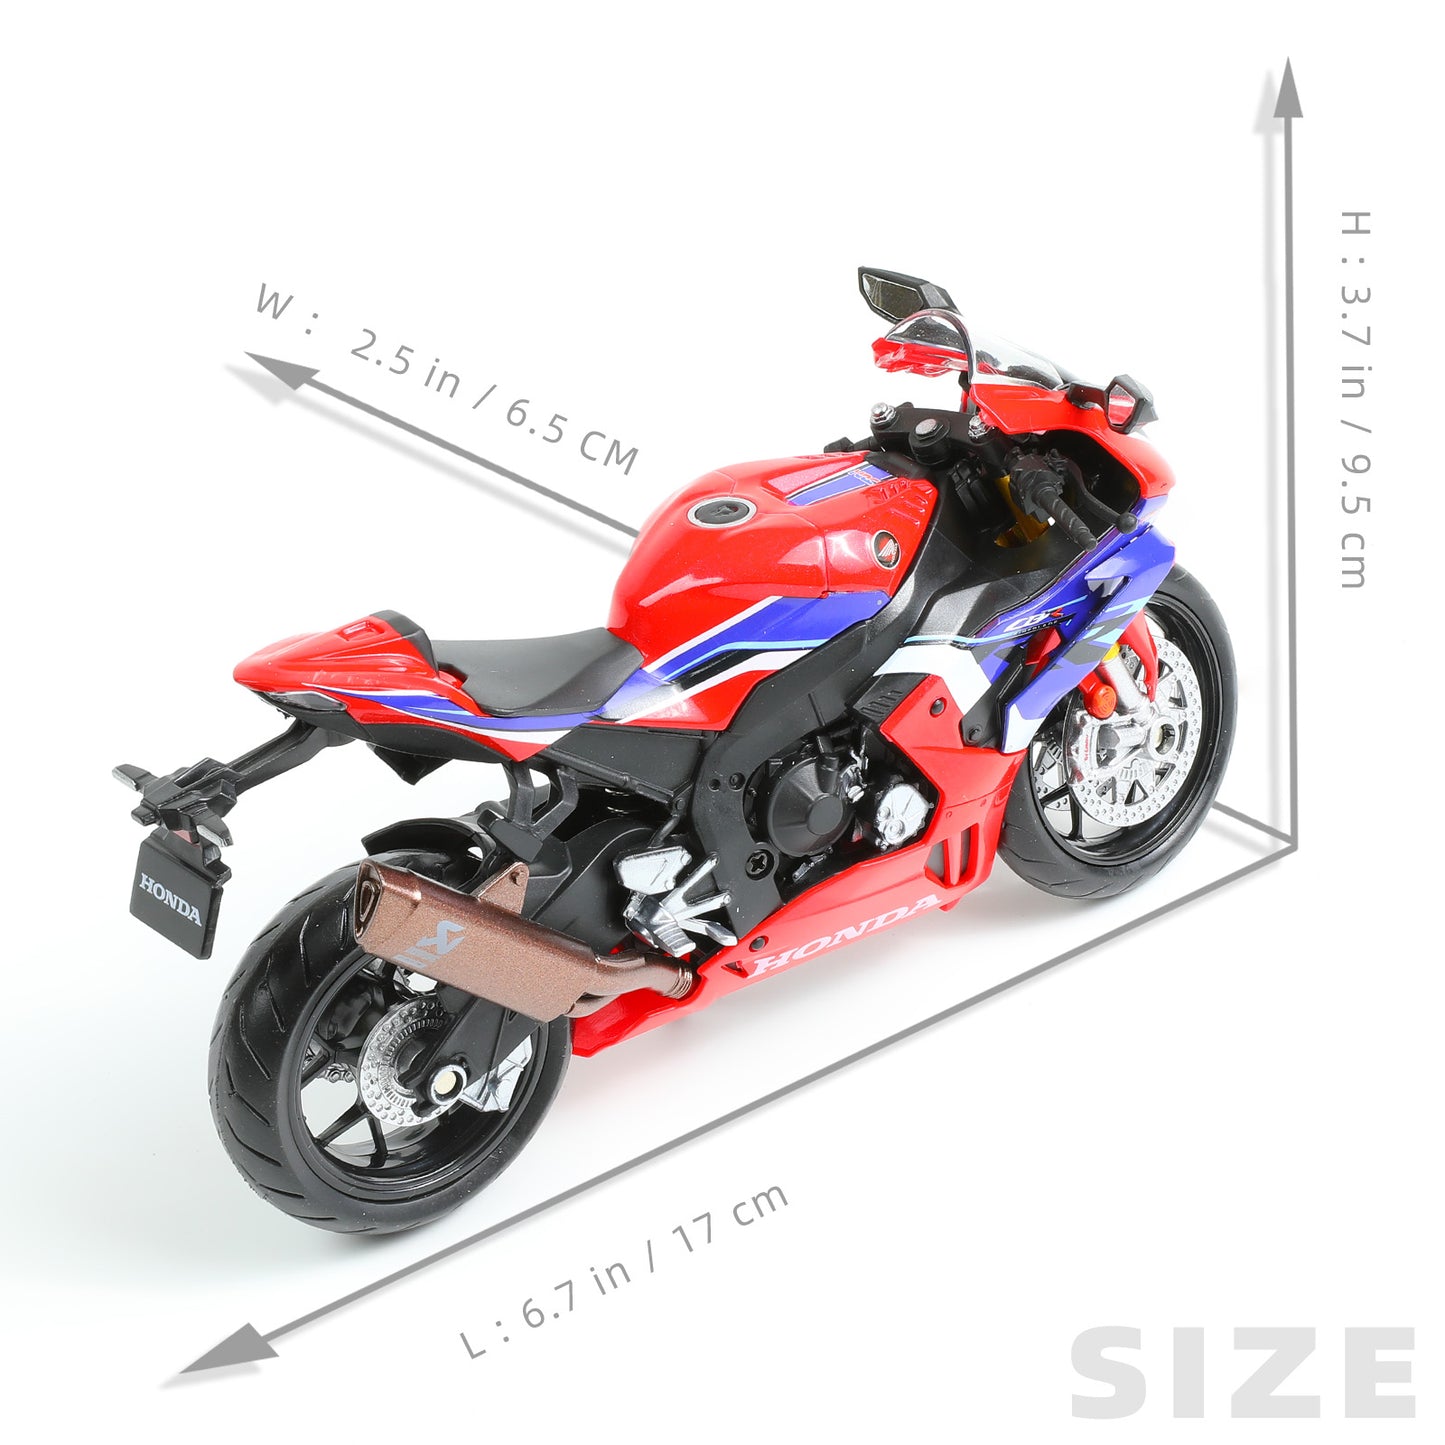 DieCast Motorcycle Model for HONDA CBR1000RR-R Firebade, Realistic Motorcycle Metal Model, 1:12 Scale Kids Moto Toy or Collection,MAKEDA Pre-Built Toys Gift